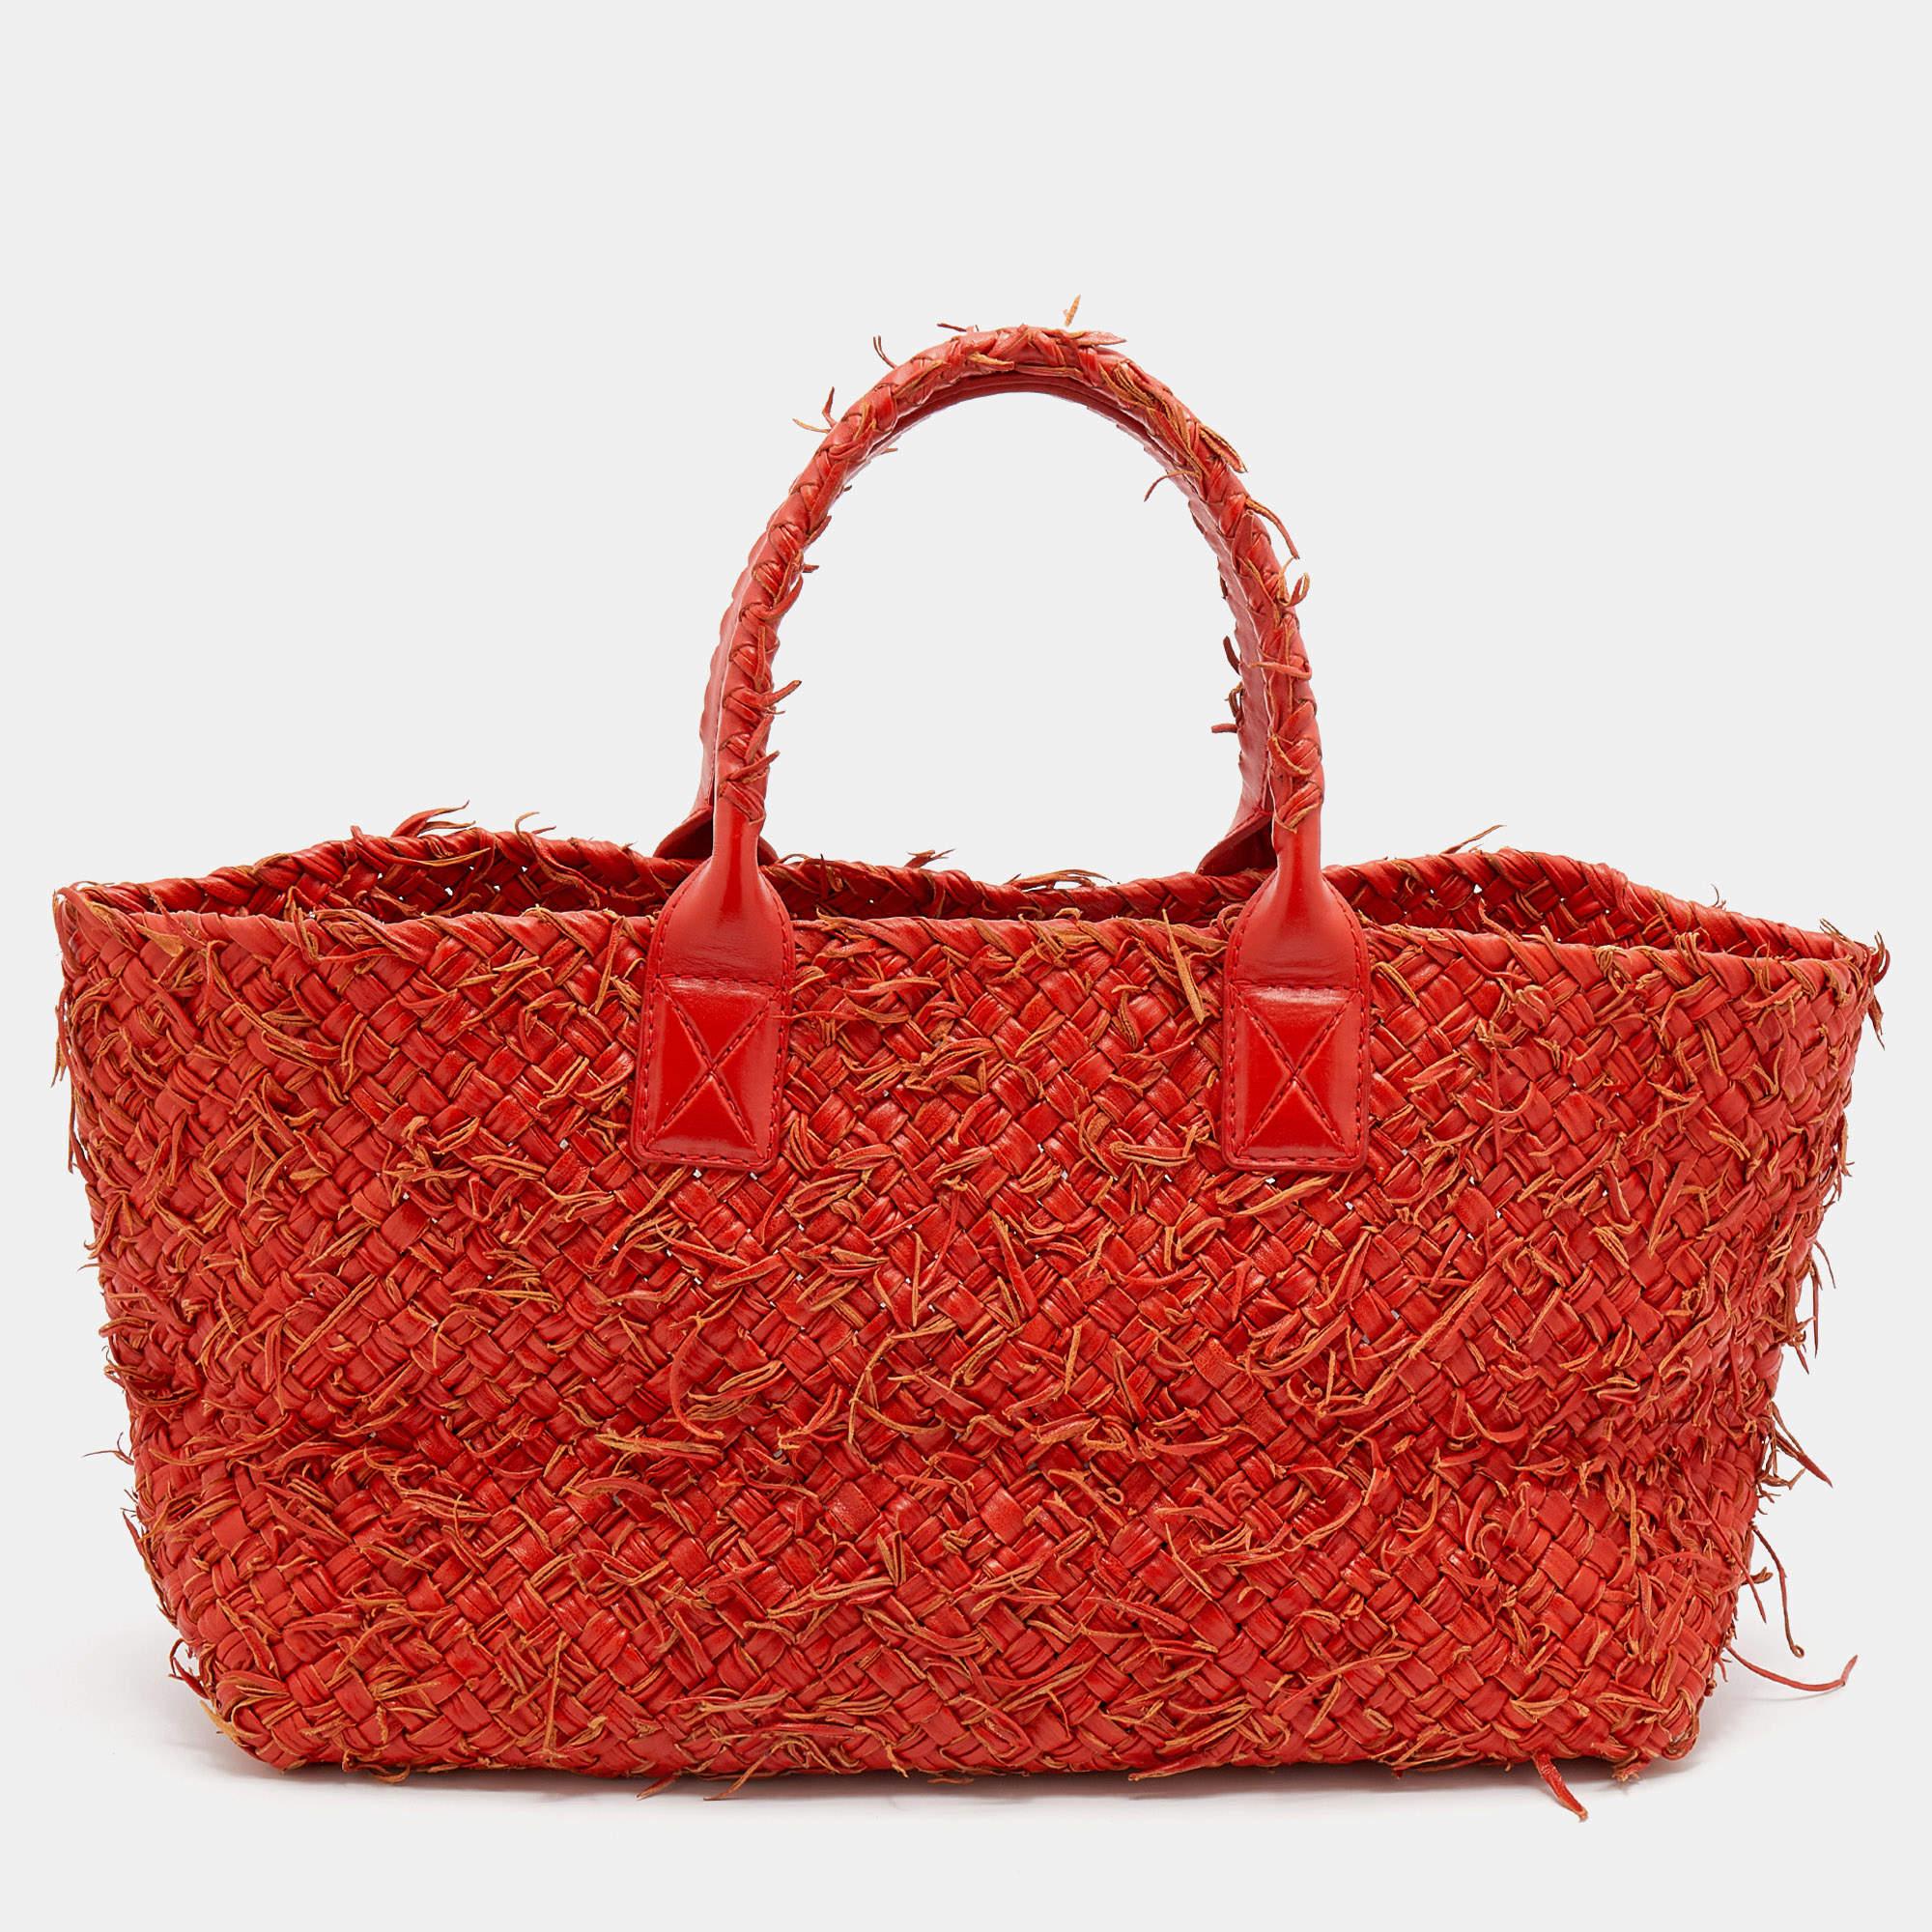 One look at this Cabat tote from Bottega Veneta and you'll know why it is a coveted piece. It is high in style and magnificent in appeal. Crafted from leather using their Intrecciato weaving technique and held by two rolled handles, it is brimming